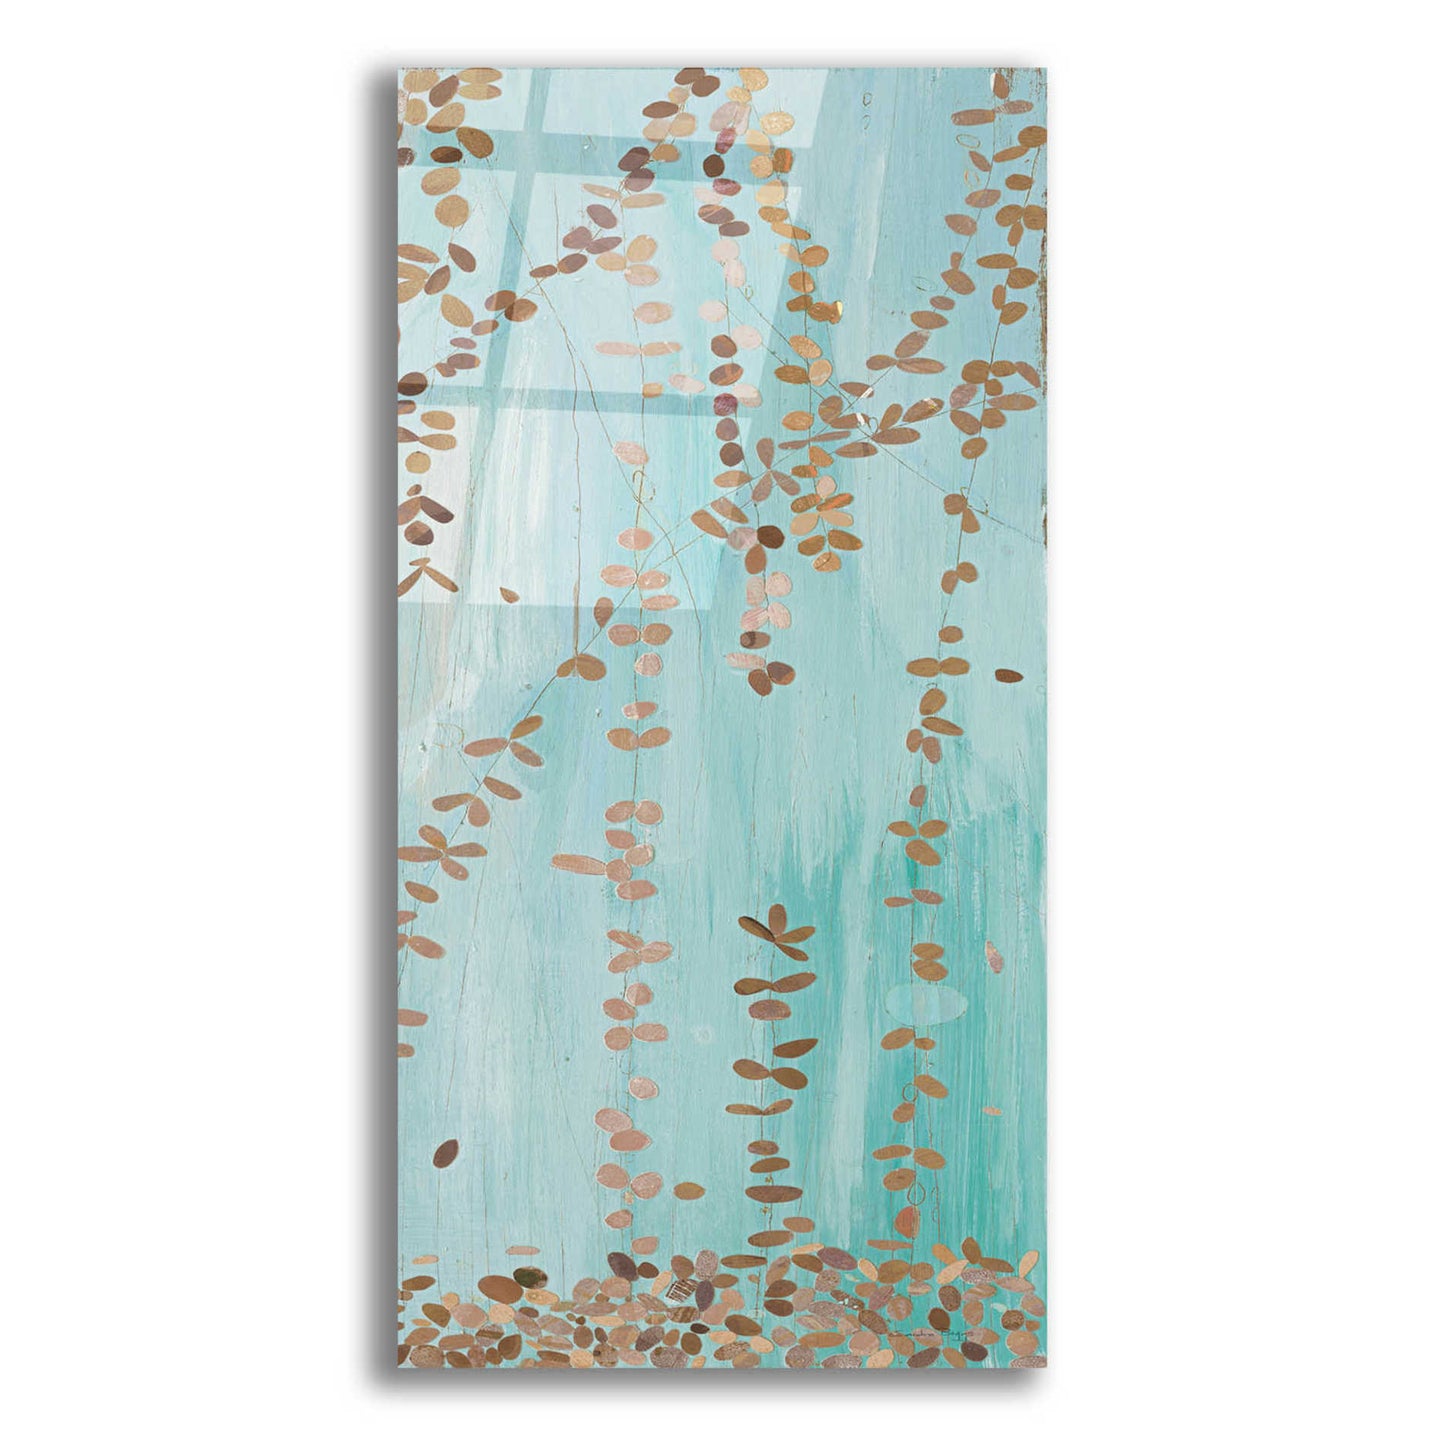 Epic Art 'Trailing Vines II Blue' by Candra Boggs,  Acrylic Glass Wall Art,12x24